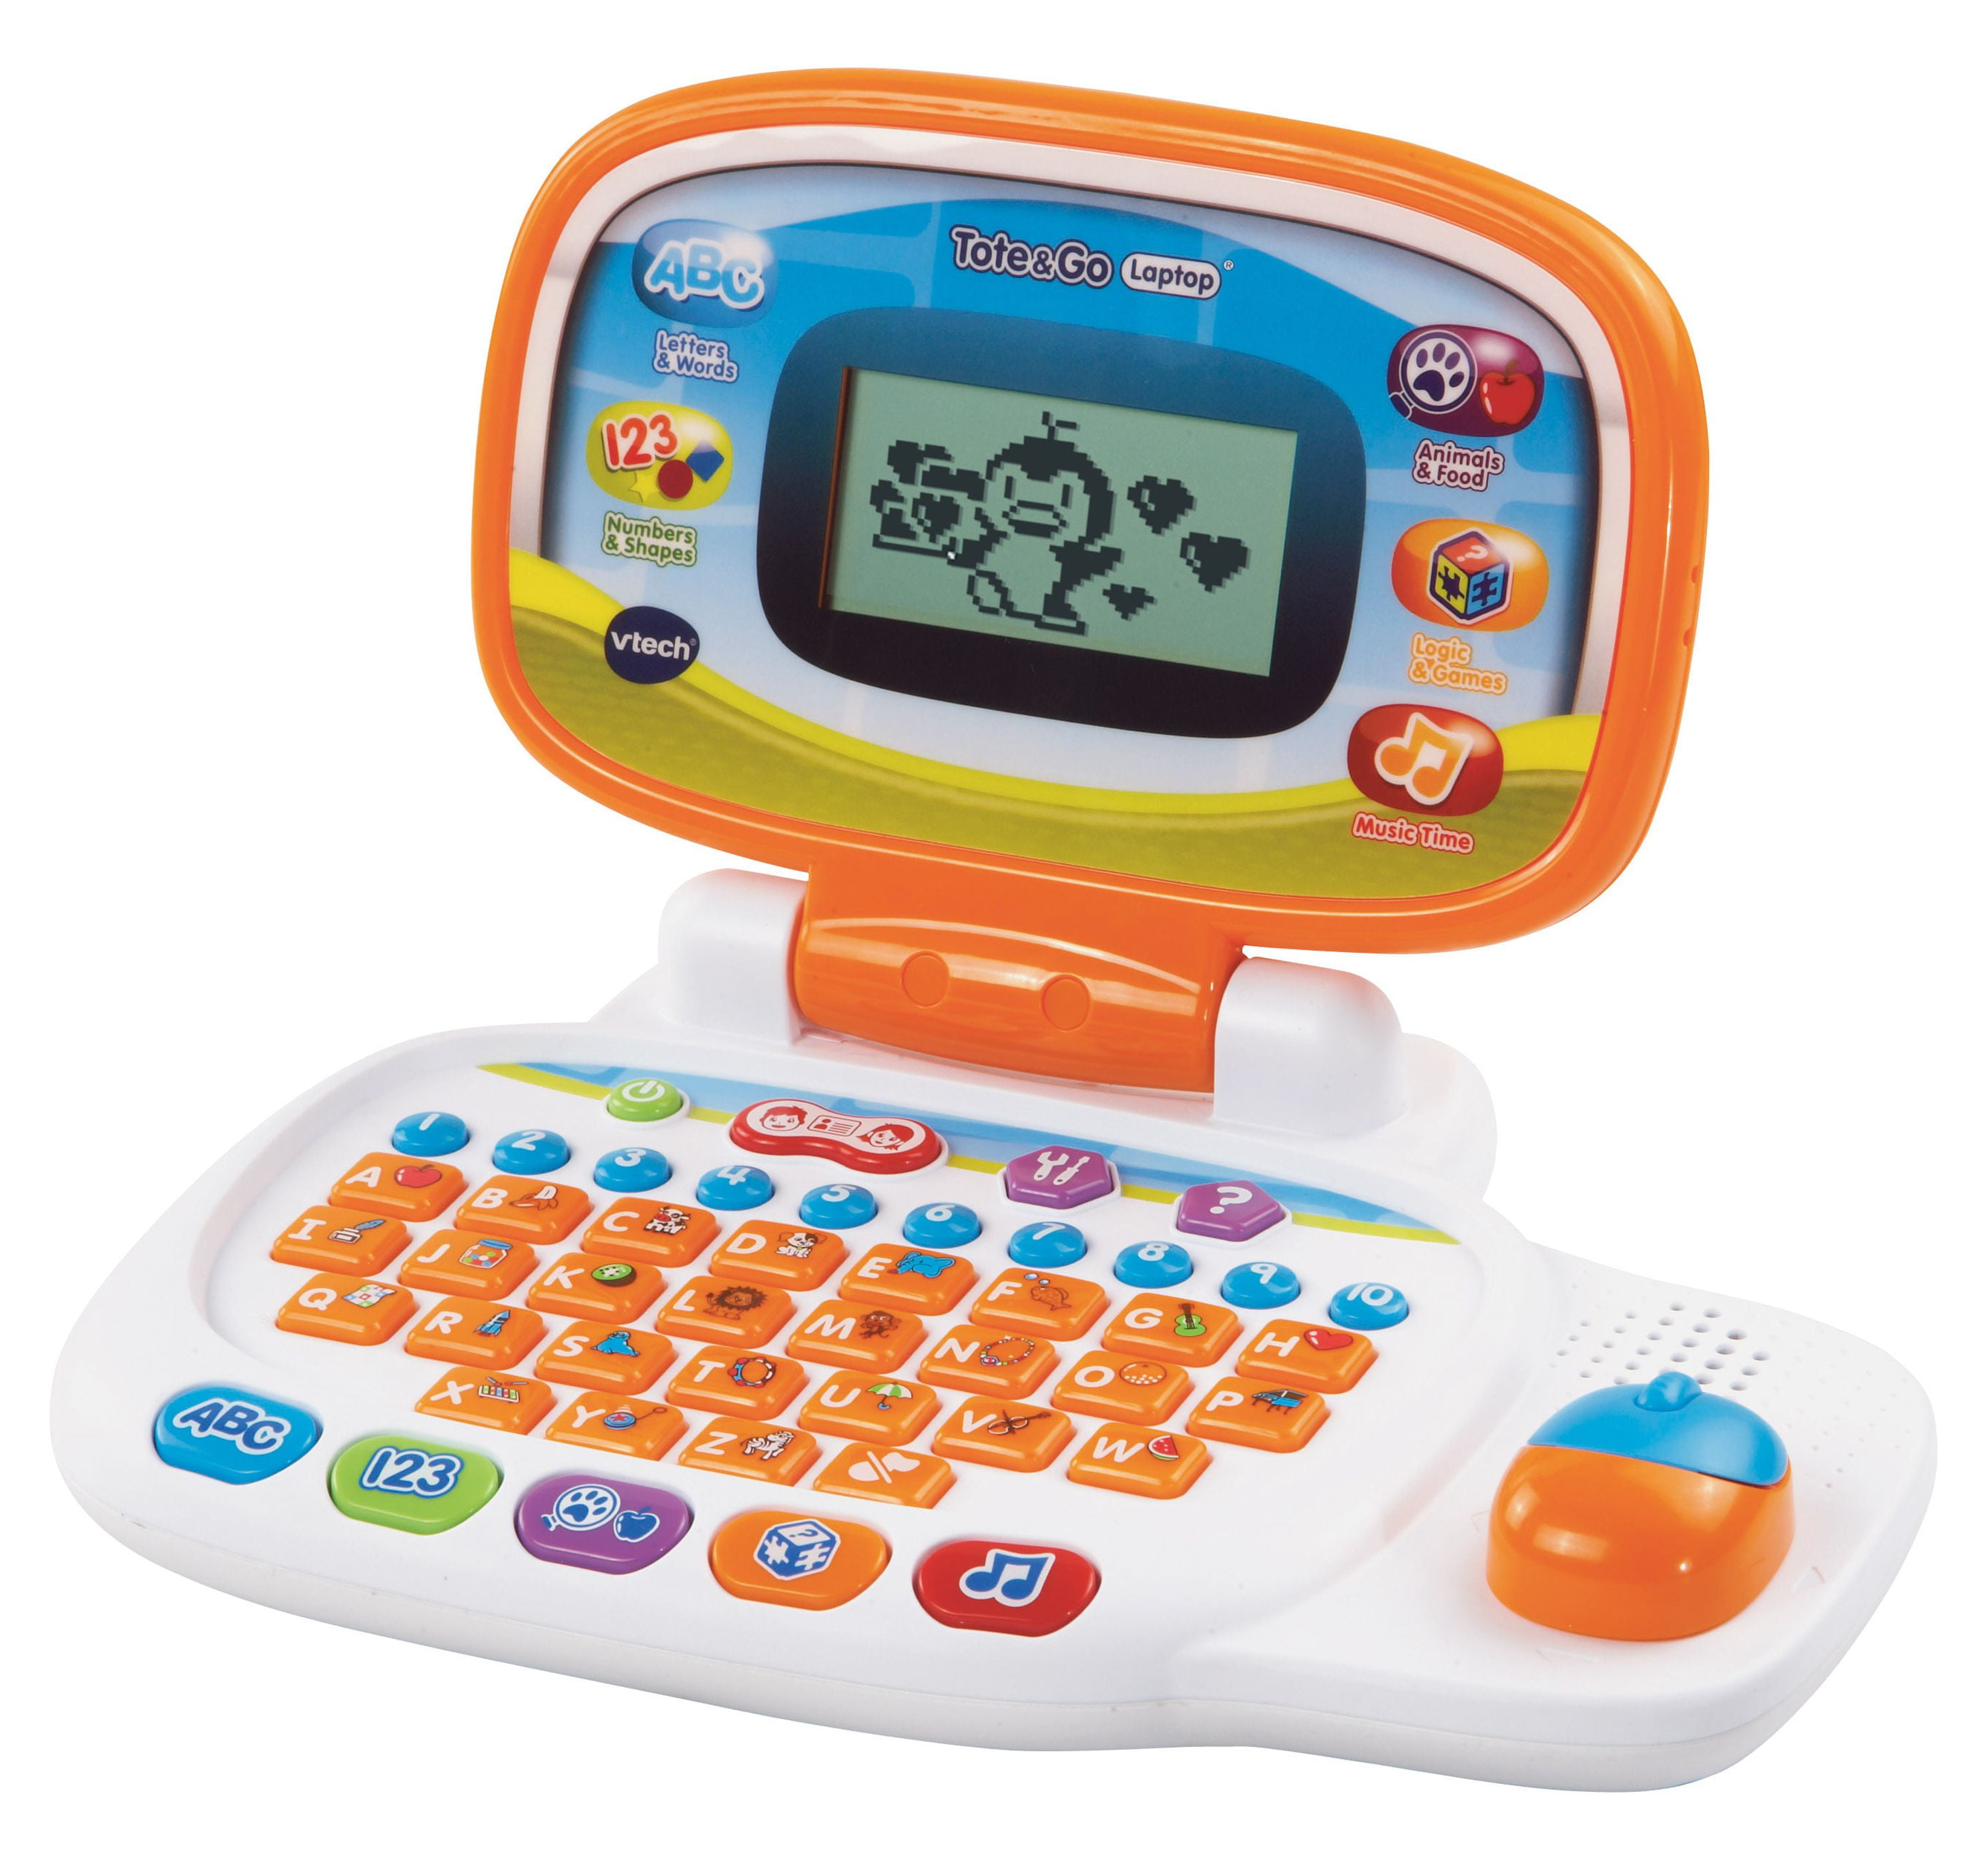 VTech Tote N' Go Laptop with Mouse (3-6 Years) Review 